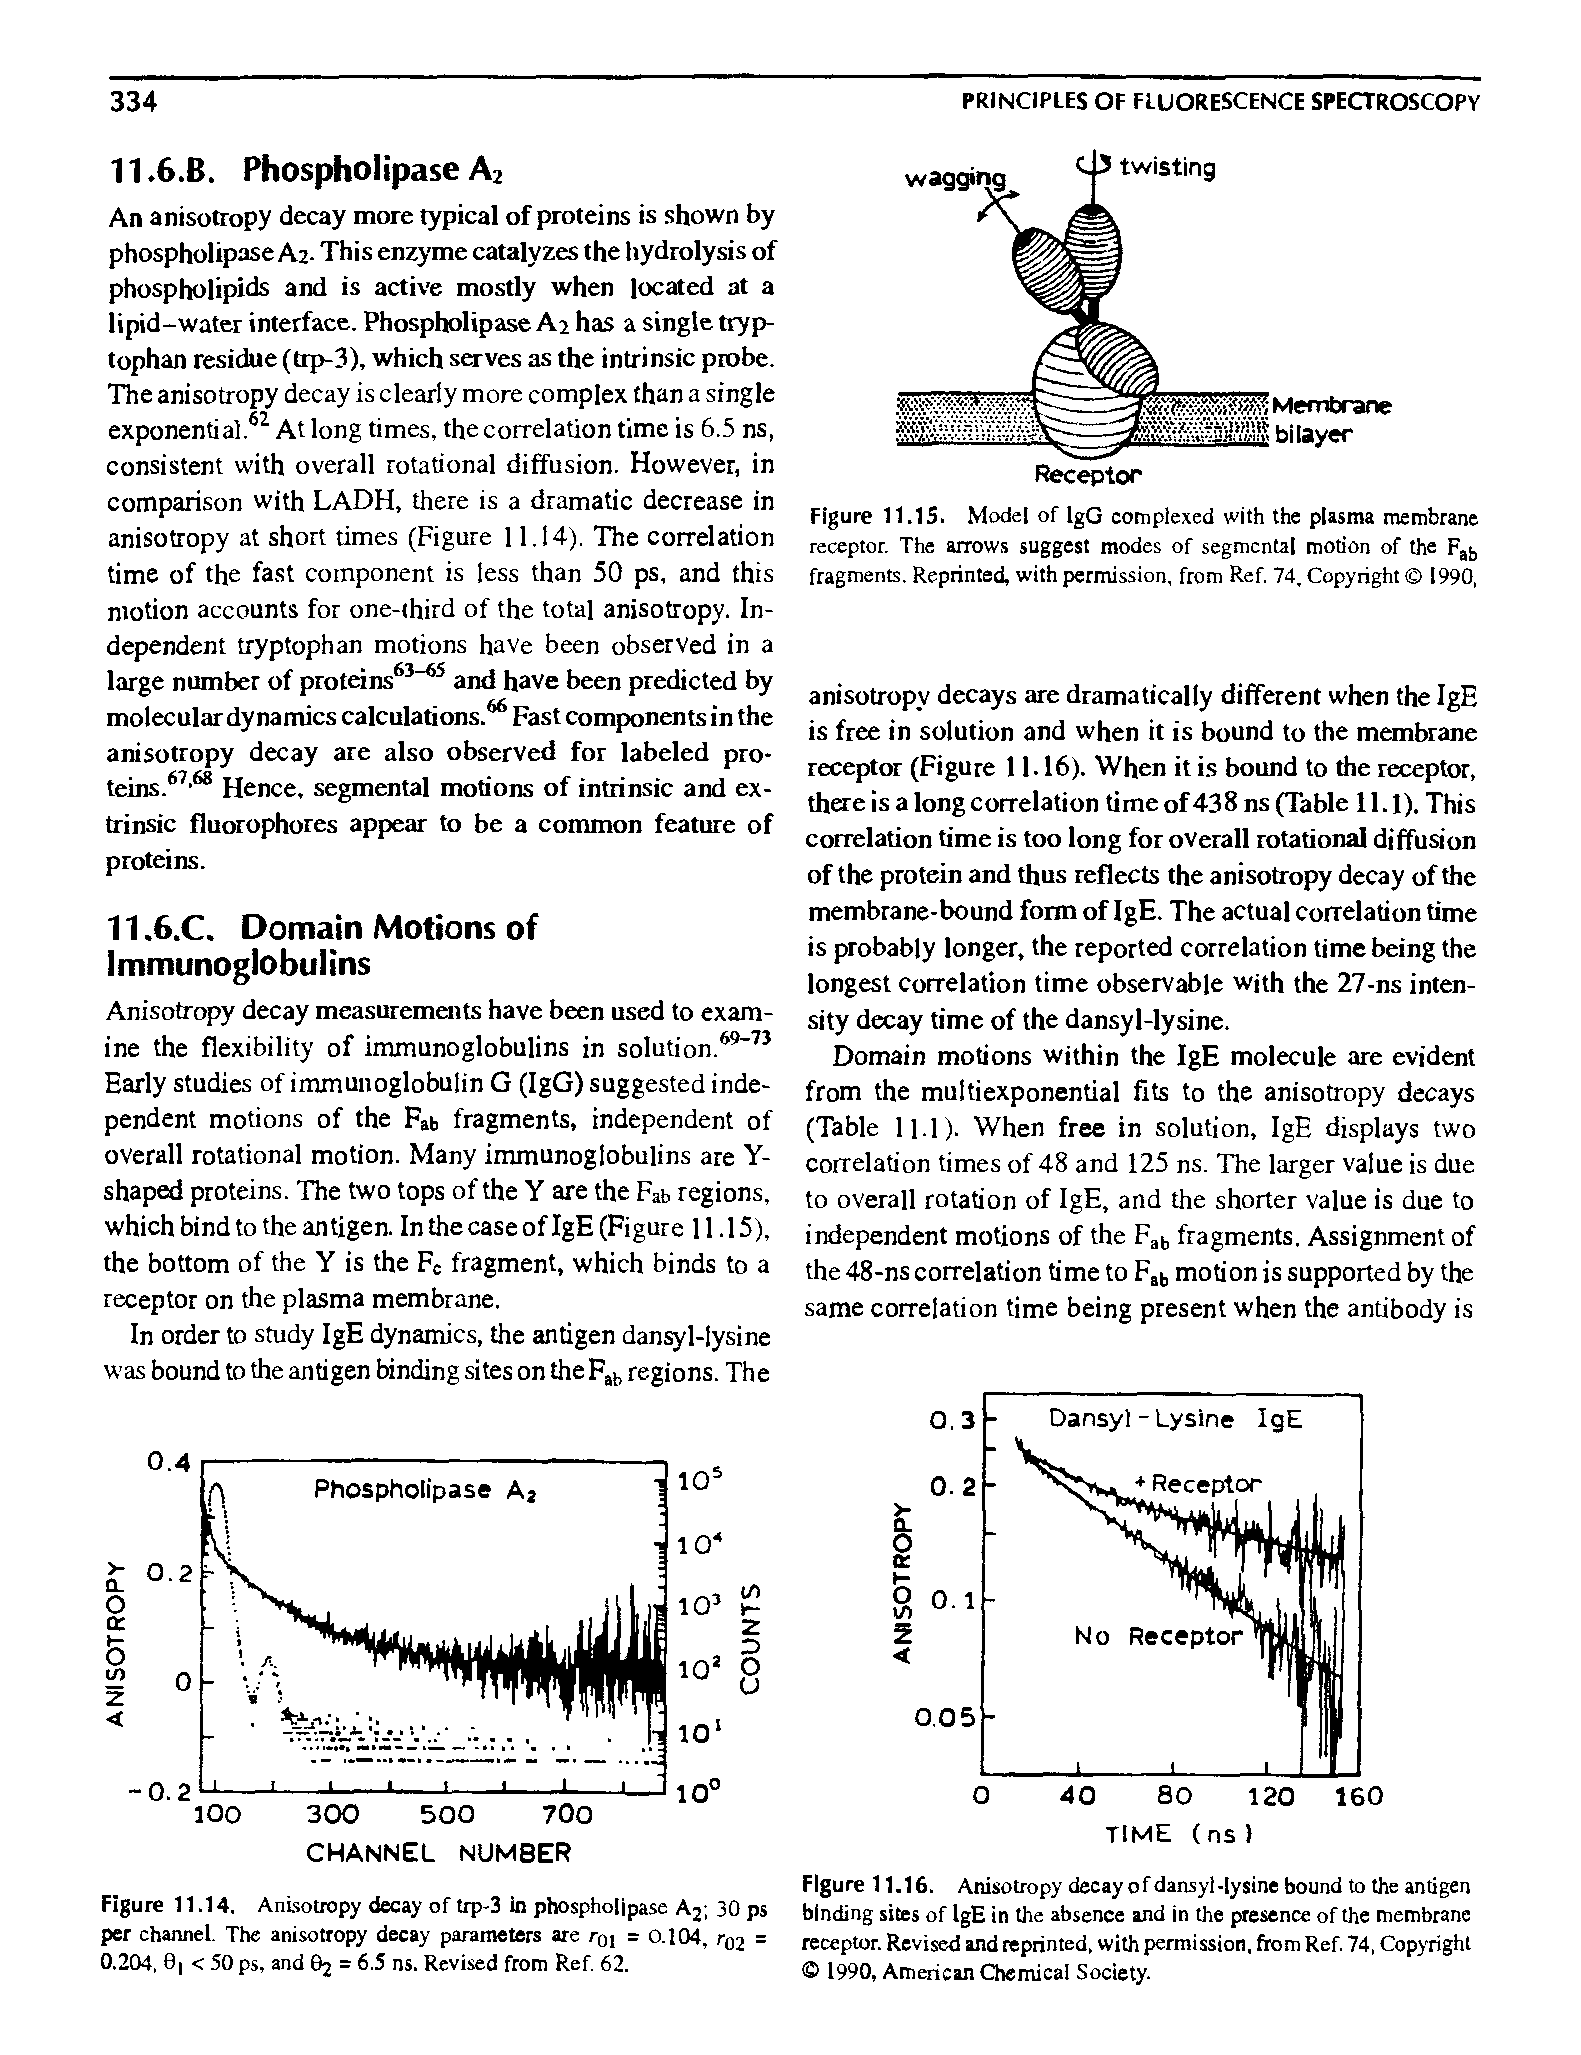 Figure 11.16. Anisotropy decay ofdansyl-lysine bound to the antigen binding sites of IgE in the absence and in the presence of the membrane receptor. Revised and reprinted, with permission, firom Ref, 74, Copyright 1990, American Chemical Sodeiy.